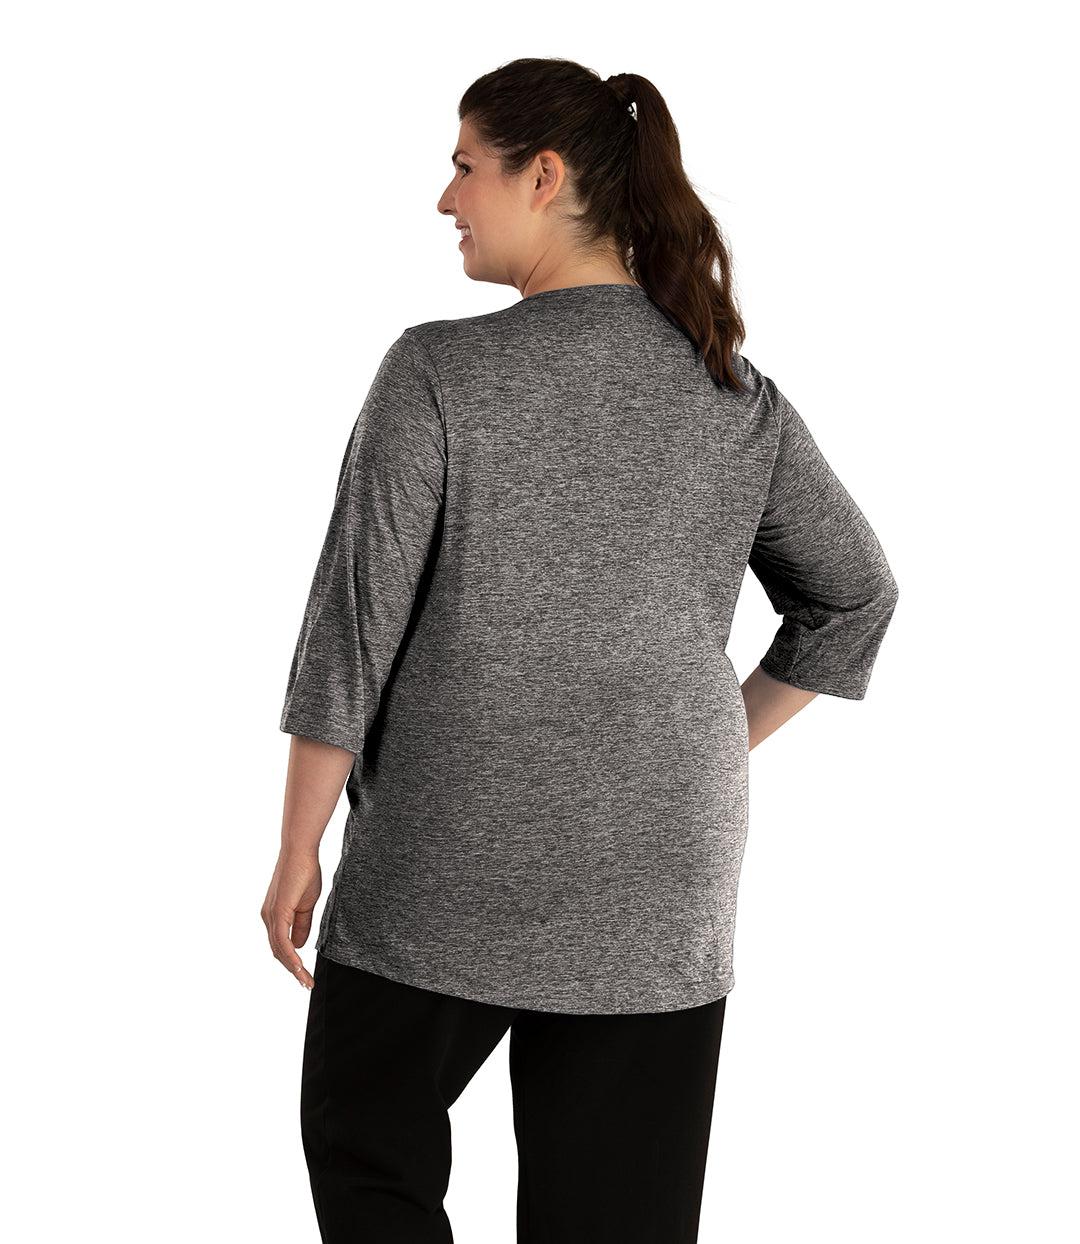 Plus size woman, facing back looking left, wearing JunoActive plus size QuikLite Scoop Neck ¾ Sleeve Top in the color Heather Charcoal. She is wearing JunoActive Plus Size Leggings in the color Black.